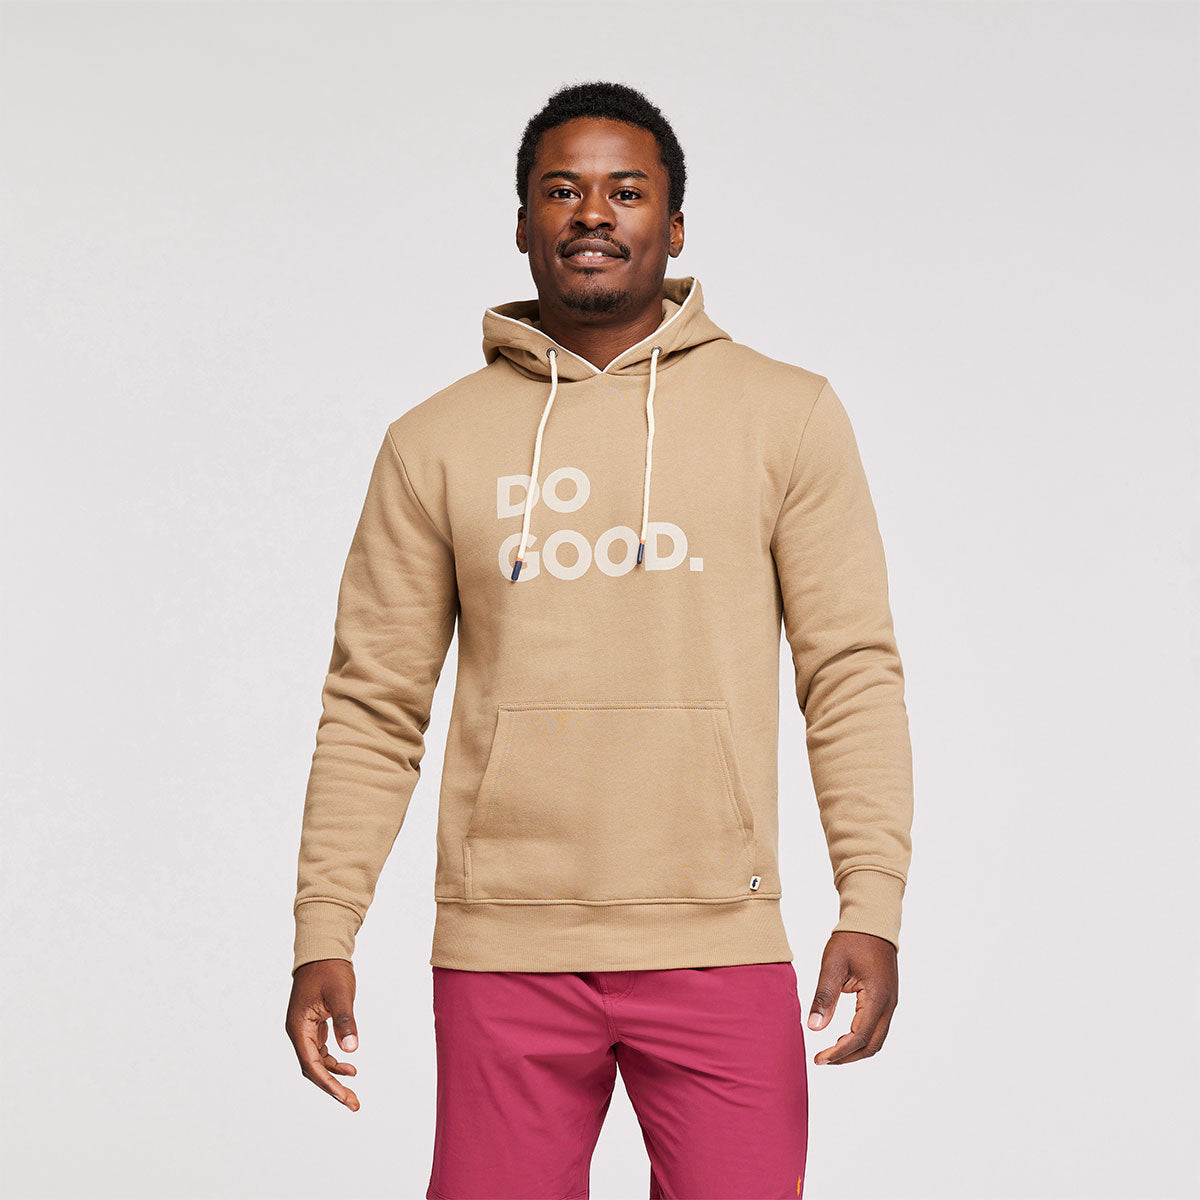 Do Good Pullover Hoodie - MENS